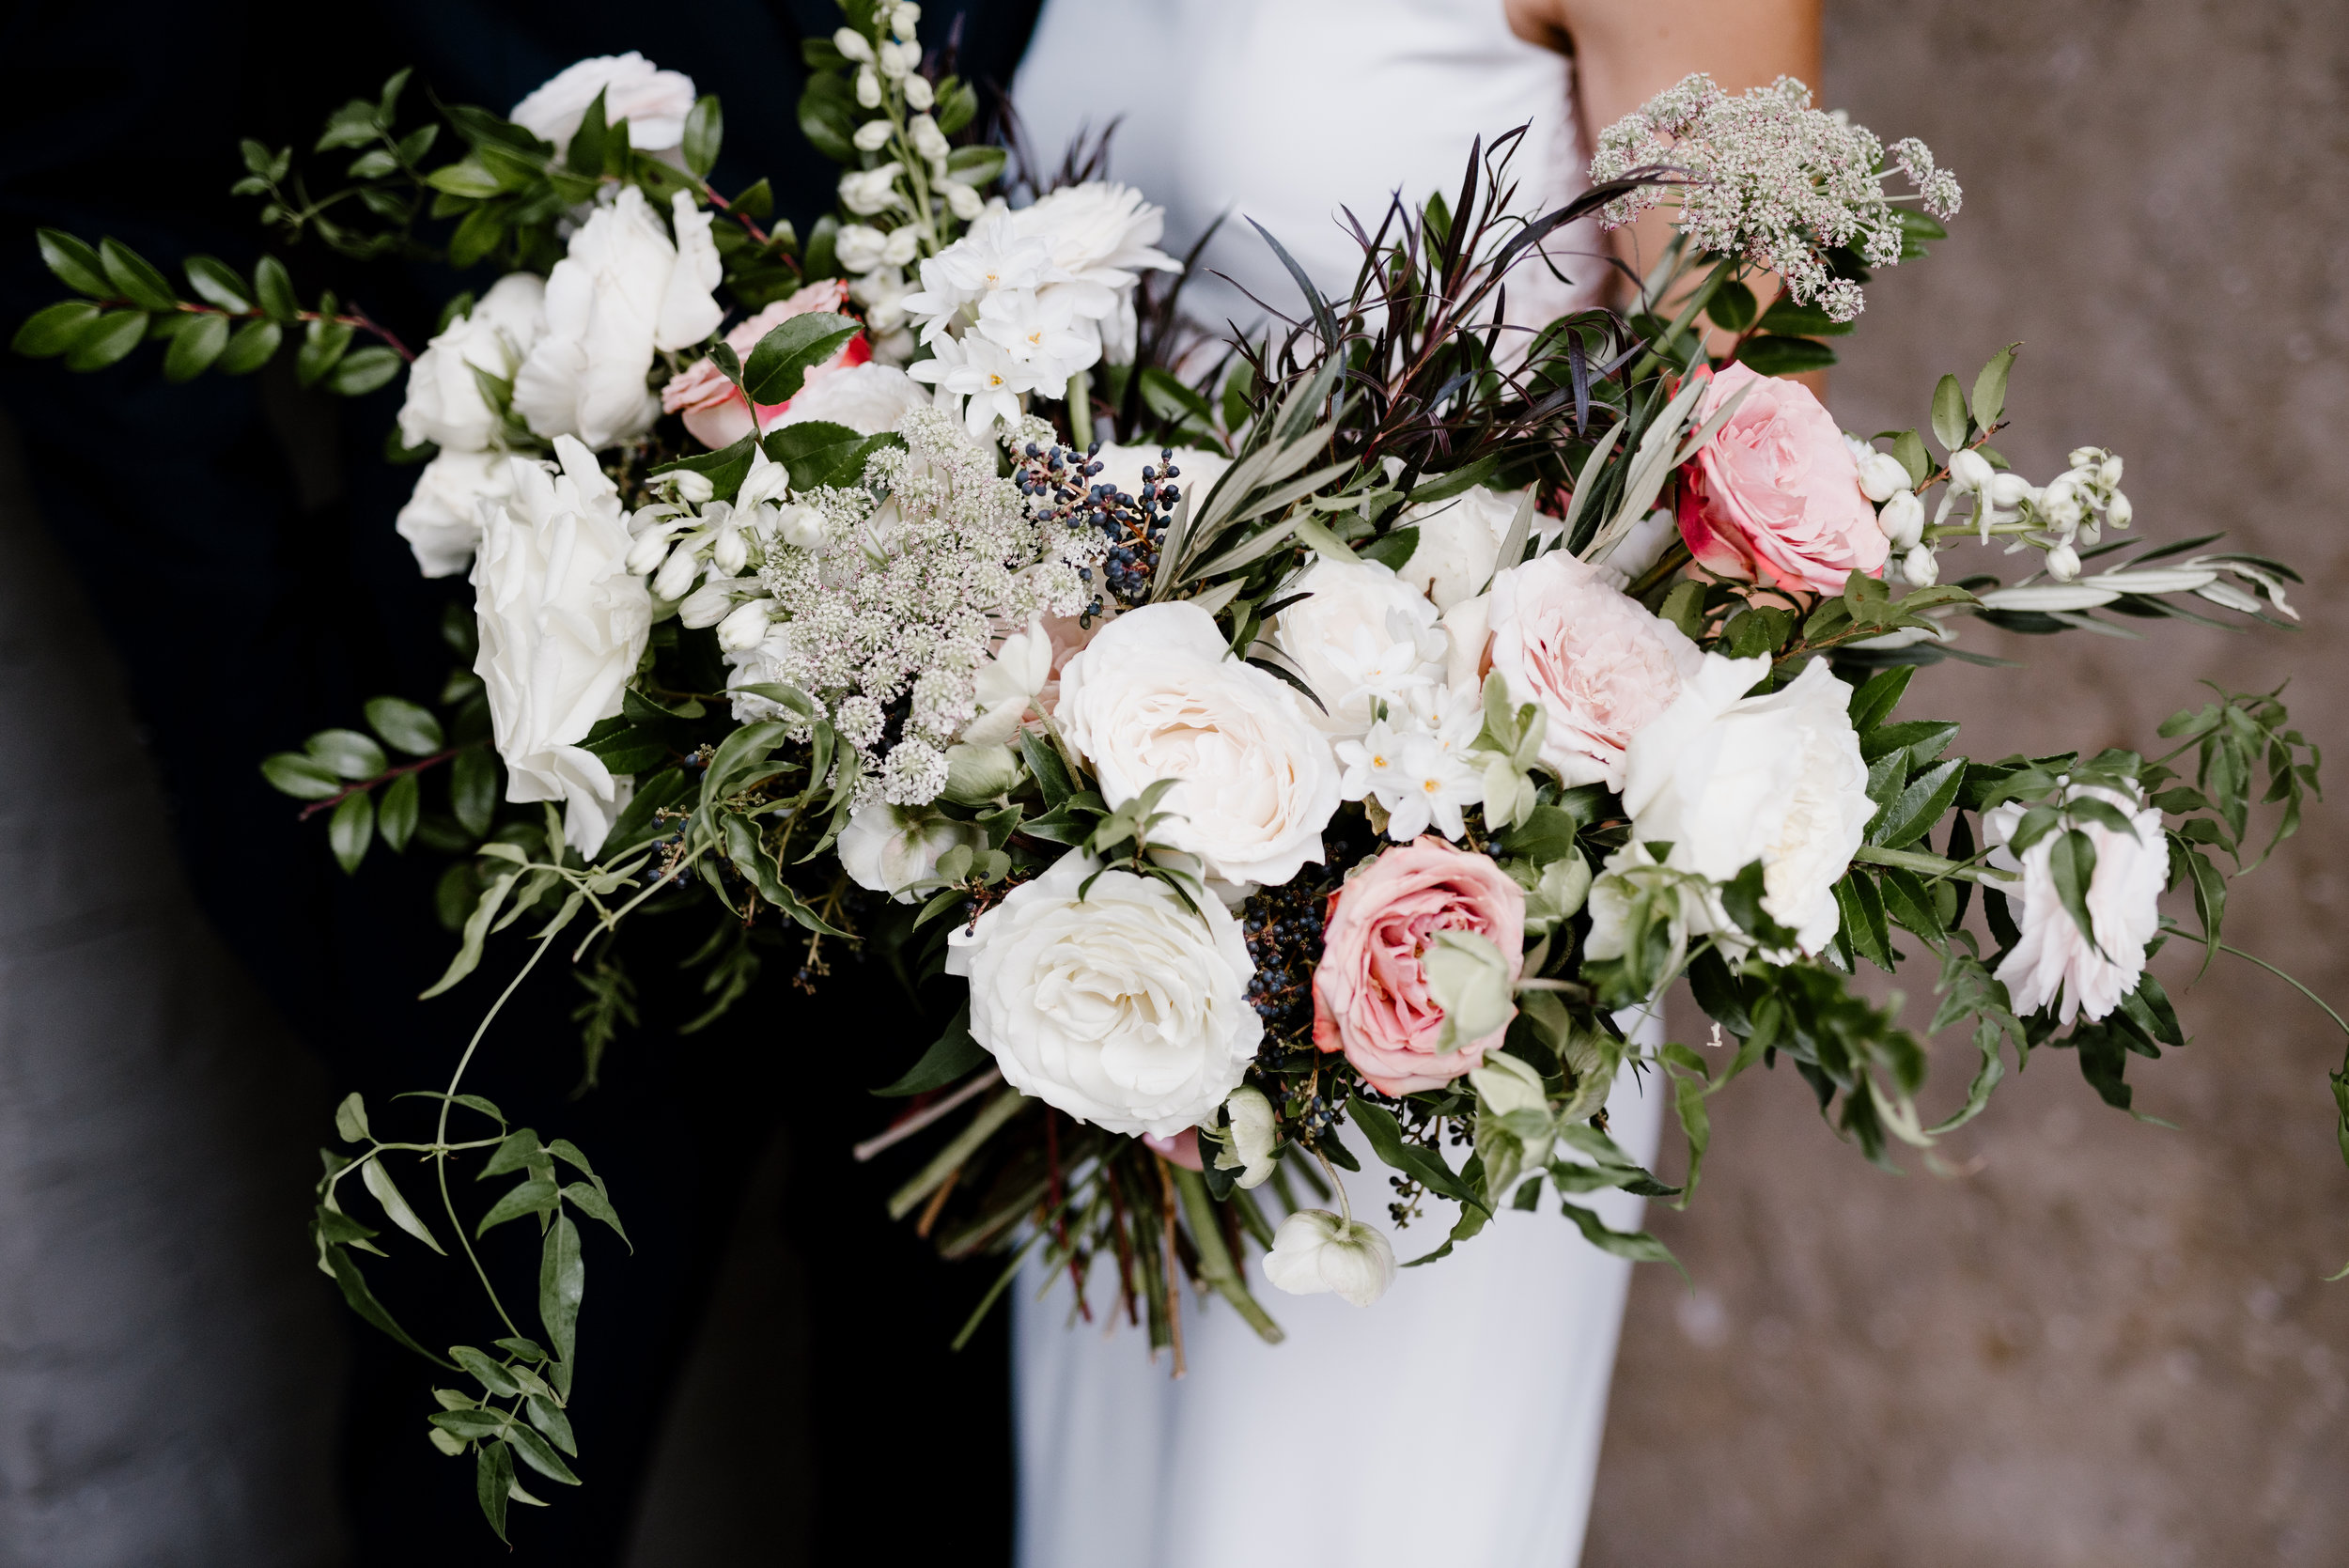 Lush bride's bouquet with garden roses, chocolate laceflower, ranunculus, and greenery// Nashville Wedding Flowers at the Cordelle